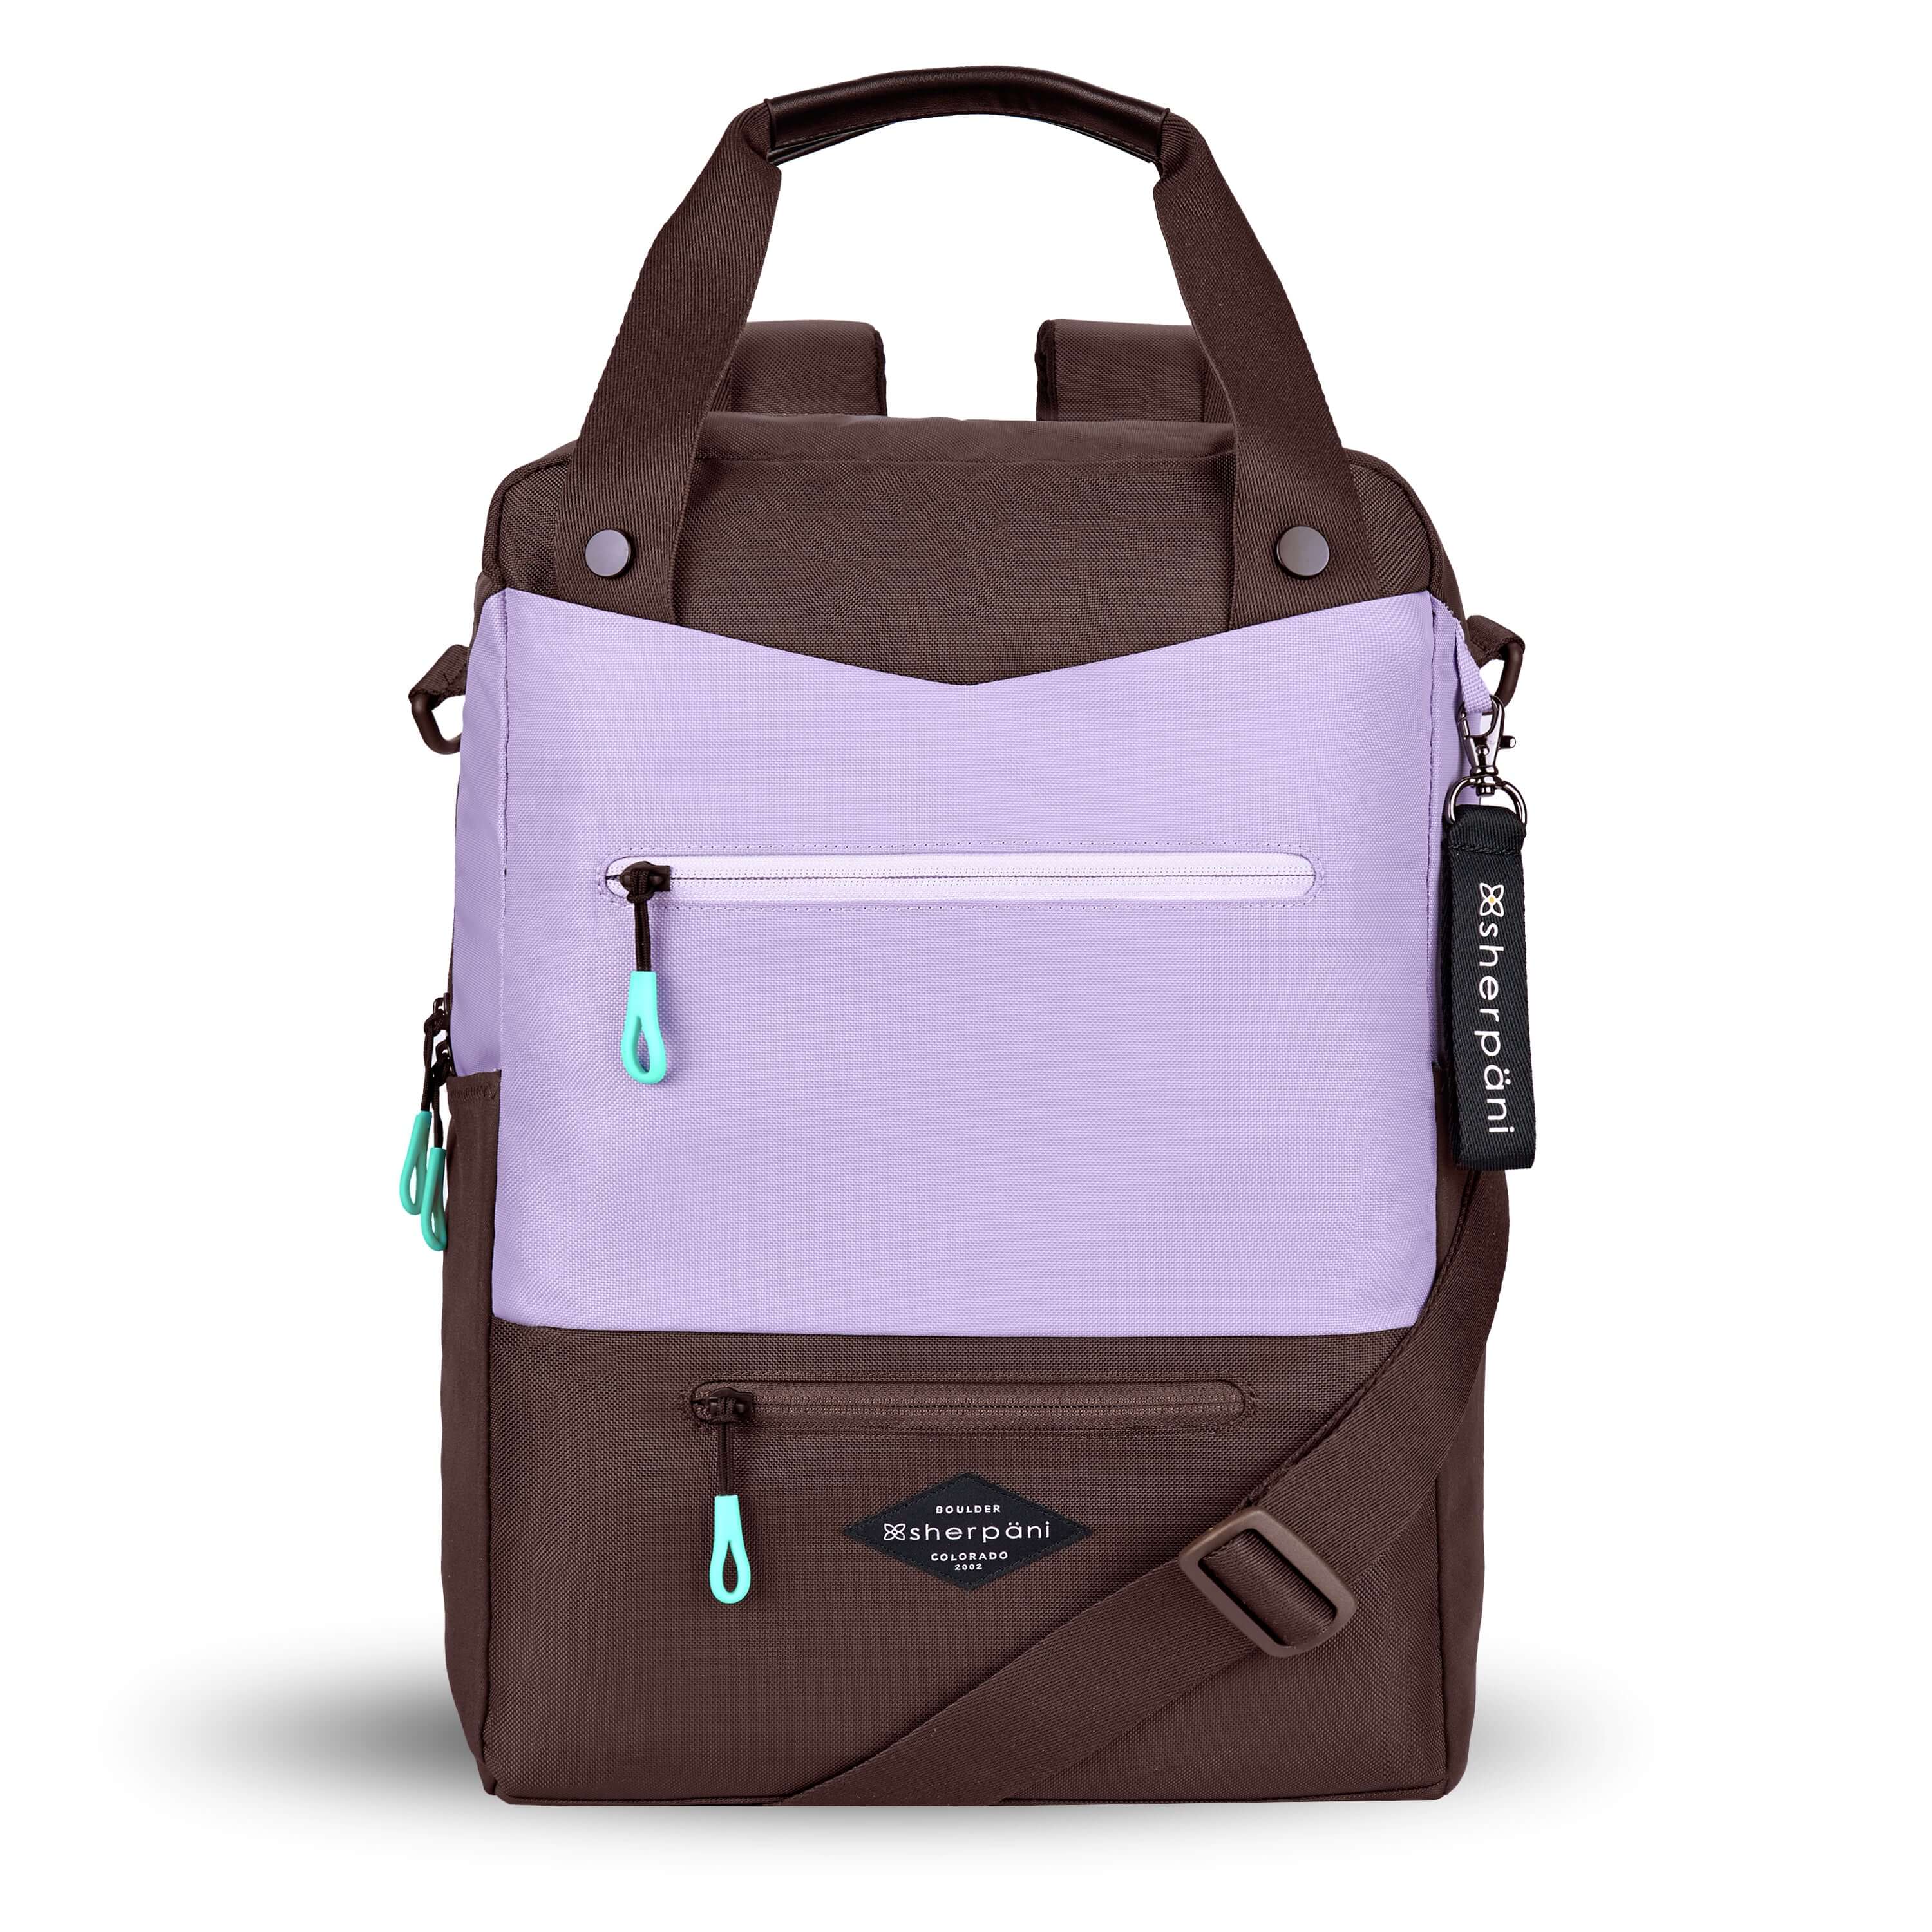 Flat front view of Sherpani's three-in-one bag, the Camden in Lavender. The bag is two-toned in lavender and brown. There are two external zipper pockets on the front panel with easy-pull zippers in aqua. A branded Sherpani keychain is clipped to the upper right corner. An elastic water bottle holder sits on either side of the bag. The bag has an adjustable/detachable crossbody strap, padded/adjustable backpack straps and short tote handles fixed at the top. 